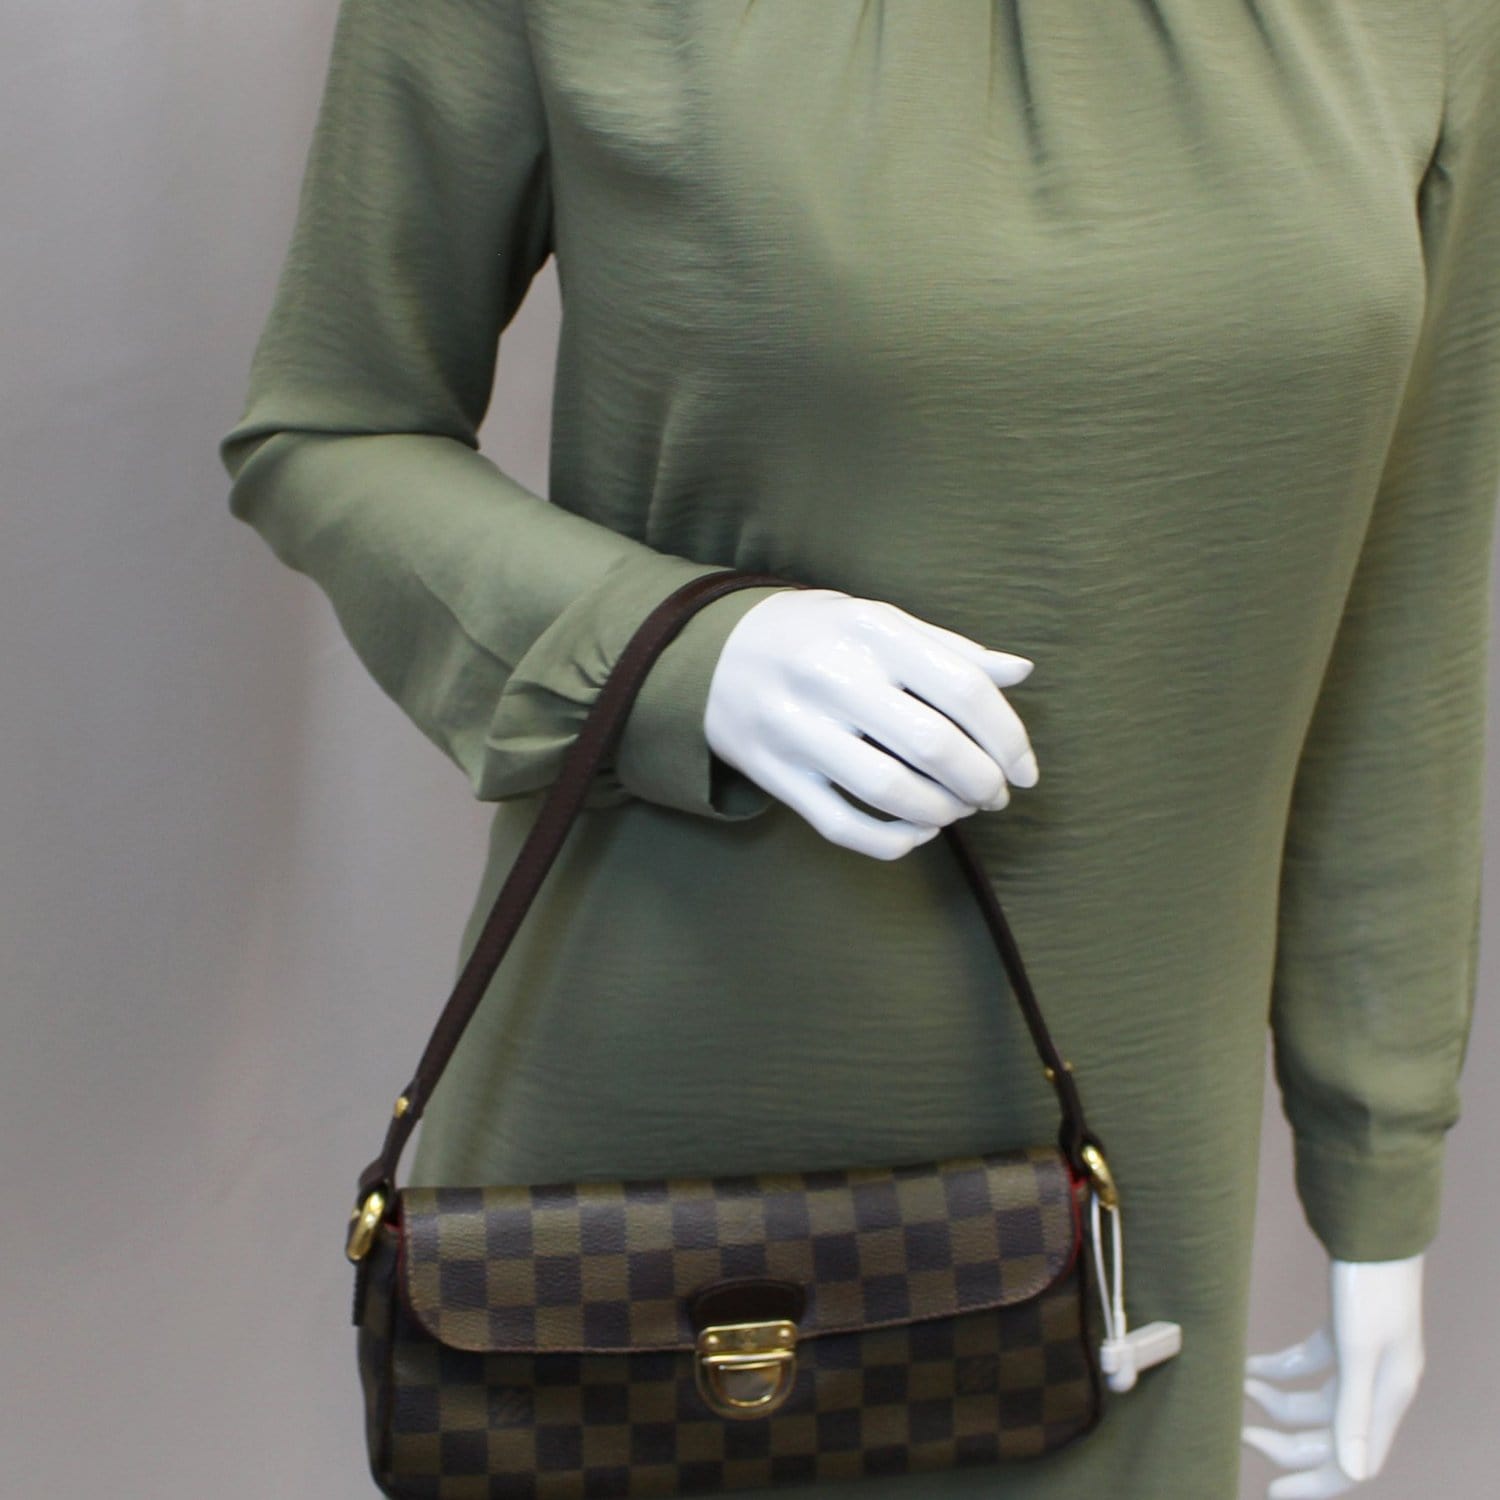 Pre-loved Louis Vuitton Ravello Leather shoulderbag